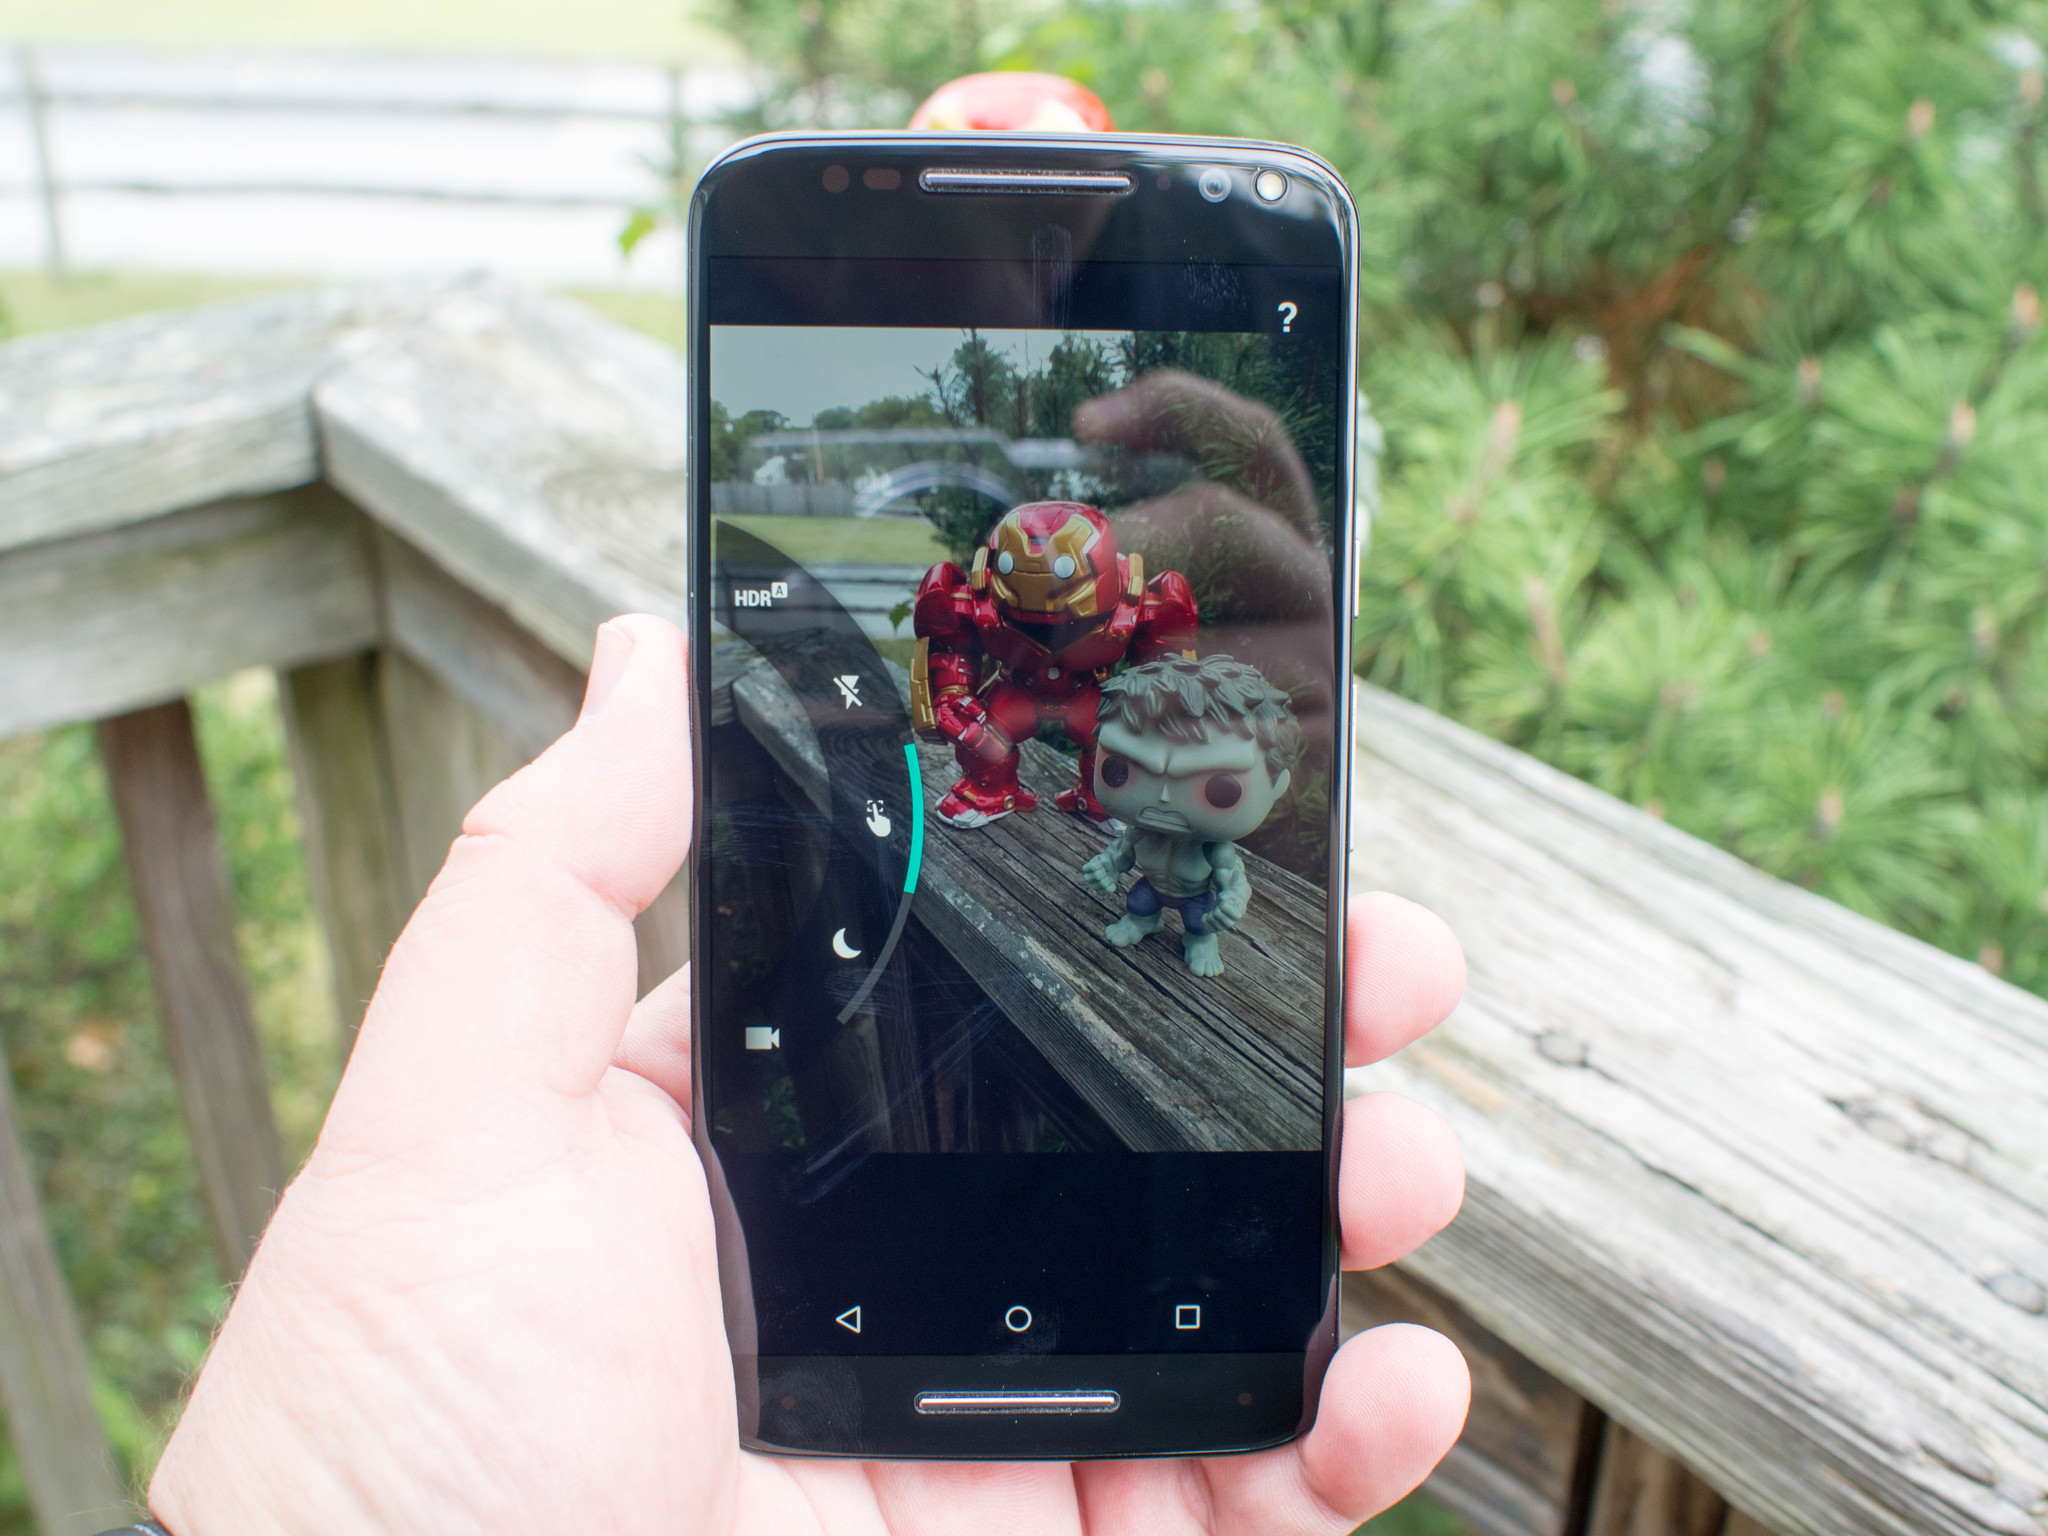 Moto X Pure Edition camera tips and tricks Android Central